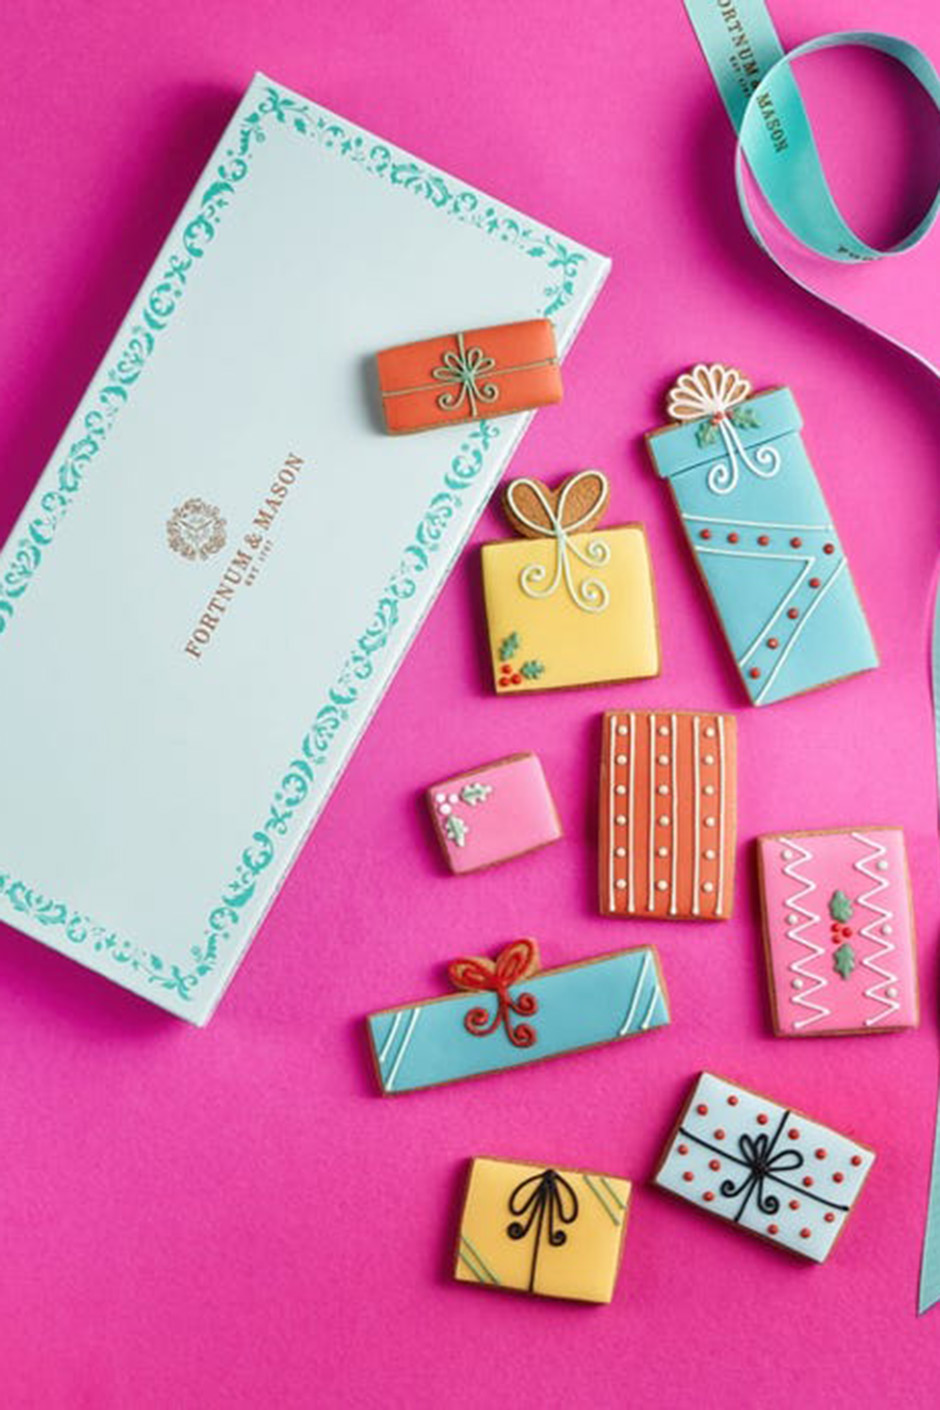 xmas23_christmas_presents_iced_biscuits_fortnum-and-mason.jpg